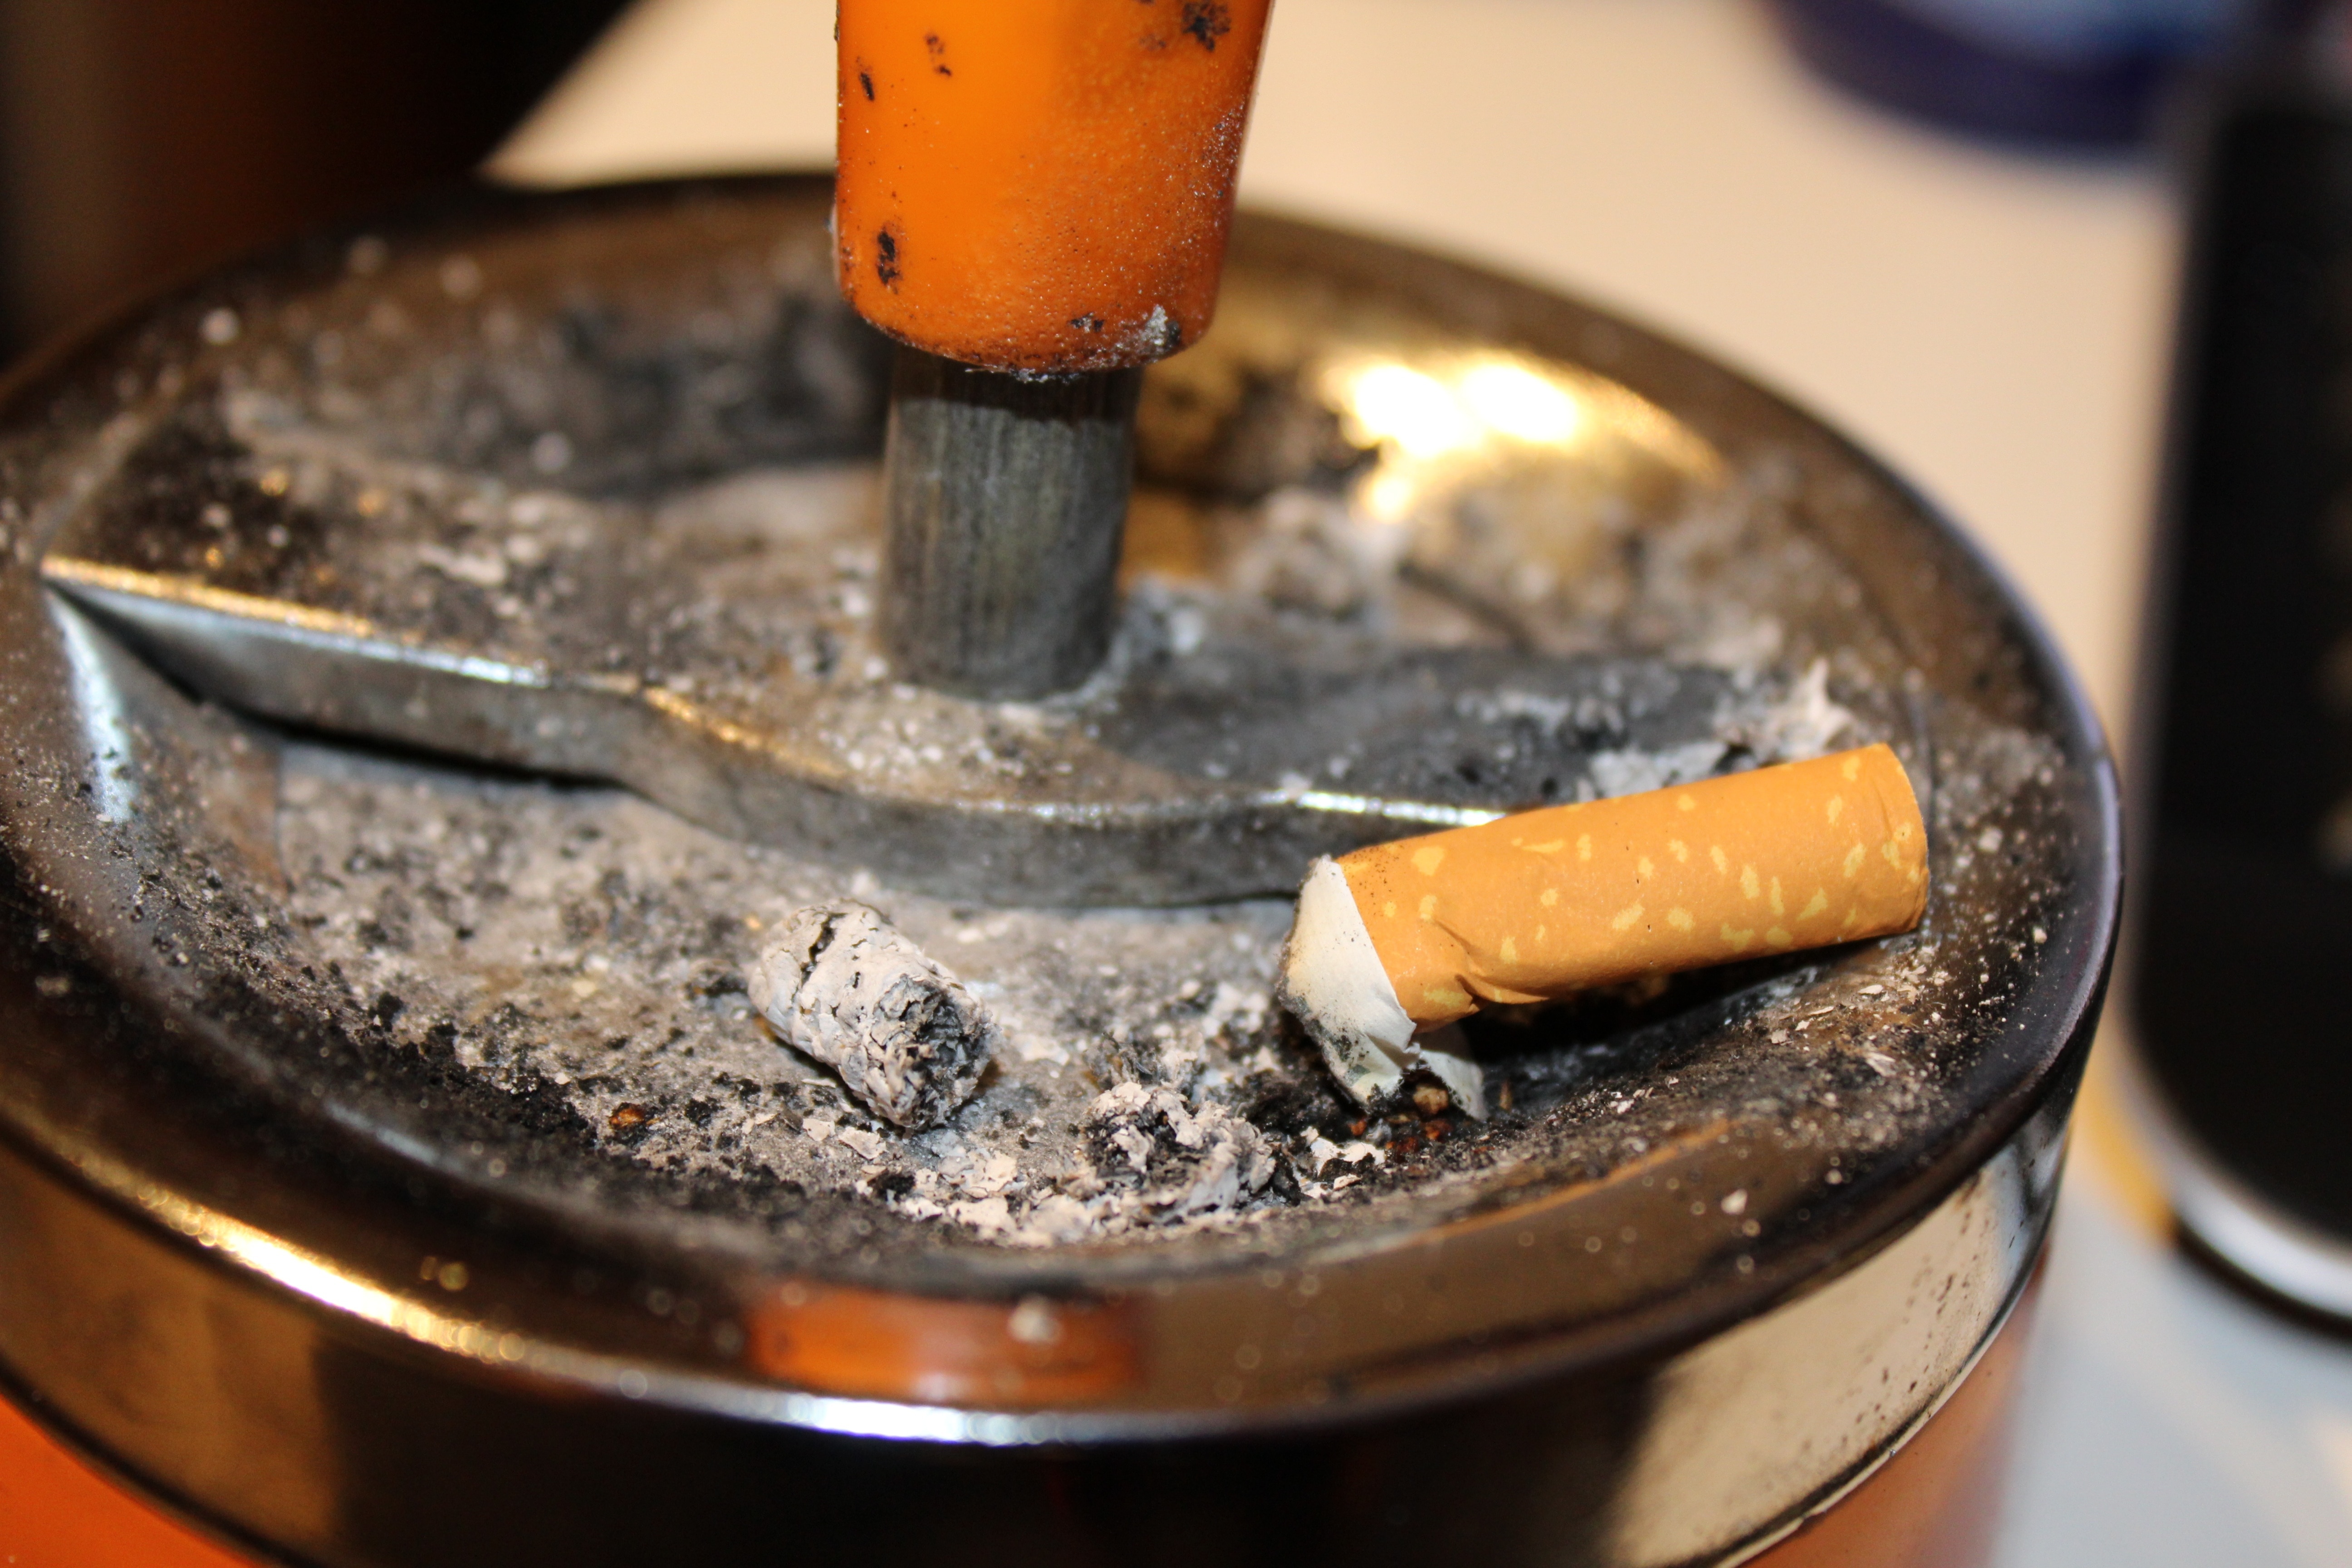 stainless steel ashtray with cigarette butt